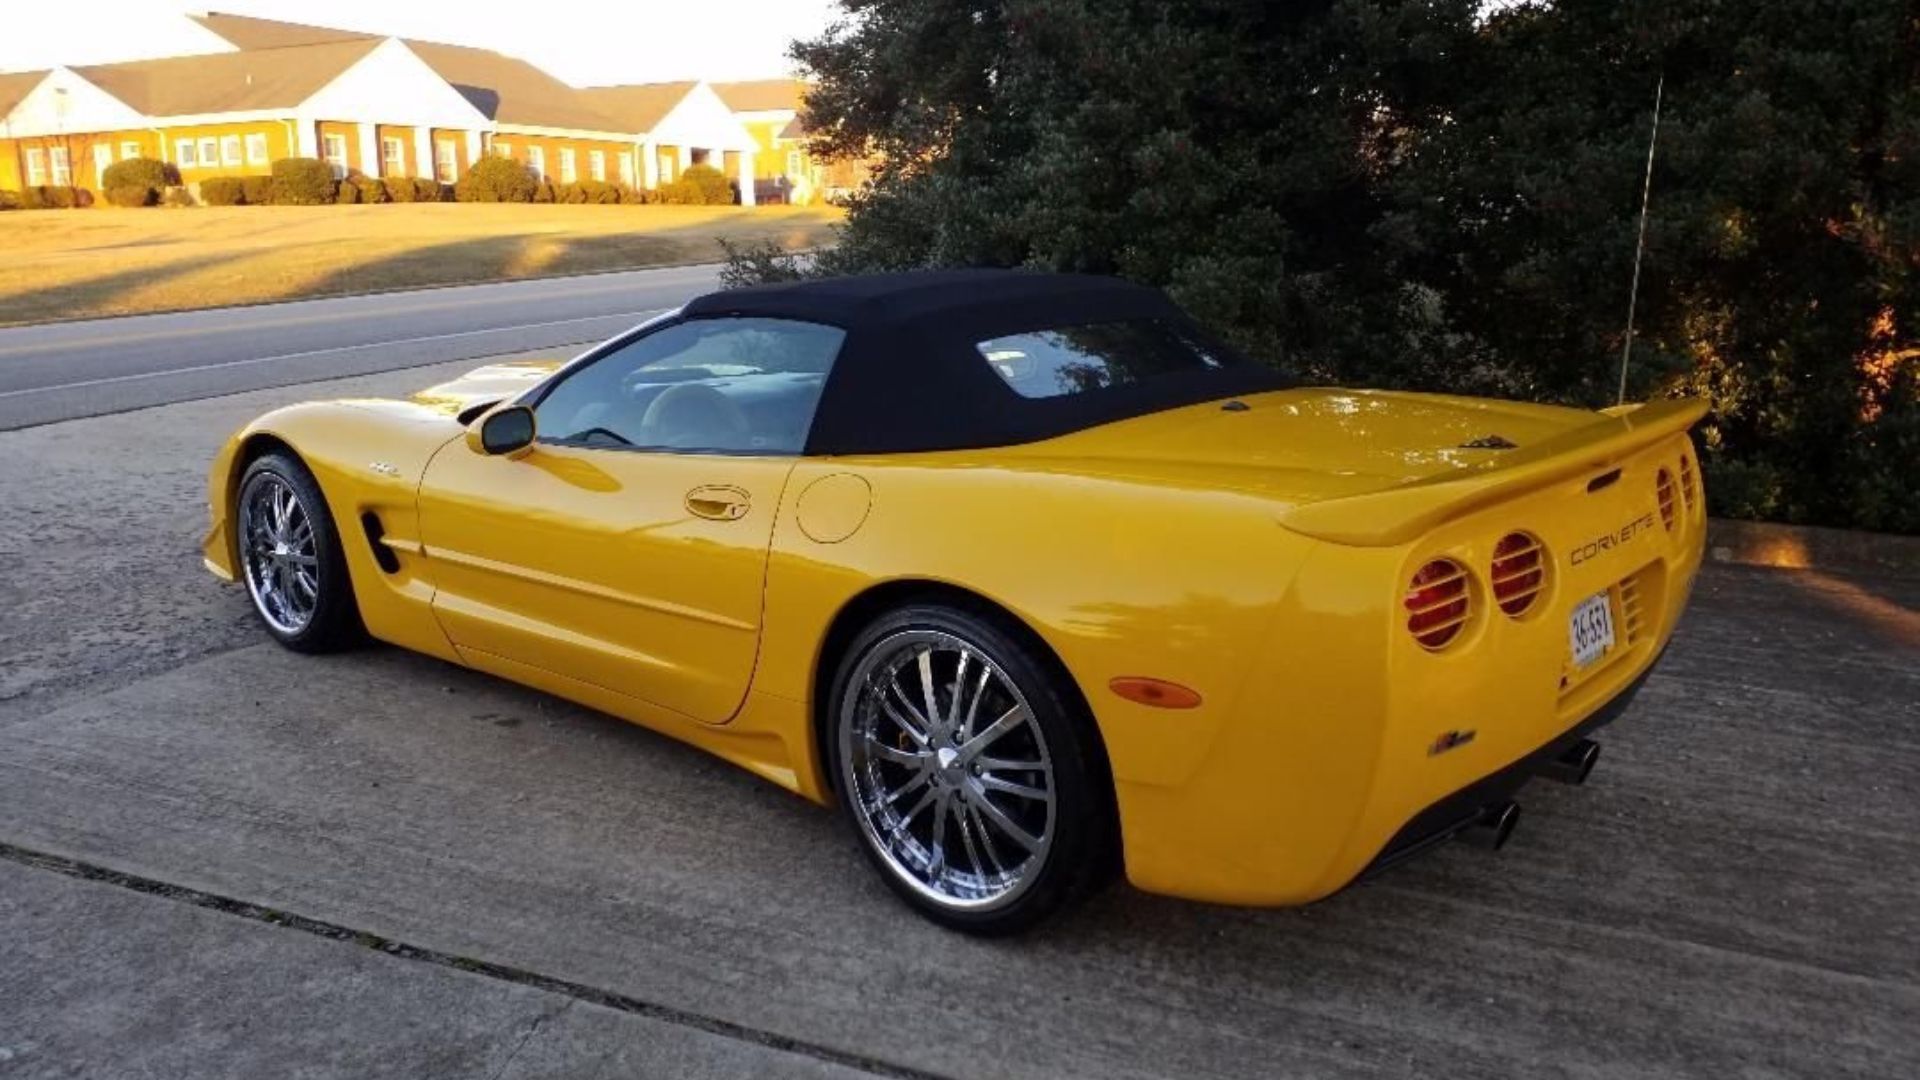 Outshine With A 2001 Chevy Corvette Packing An LS1 And Magnacharger 